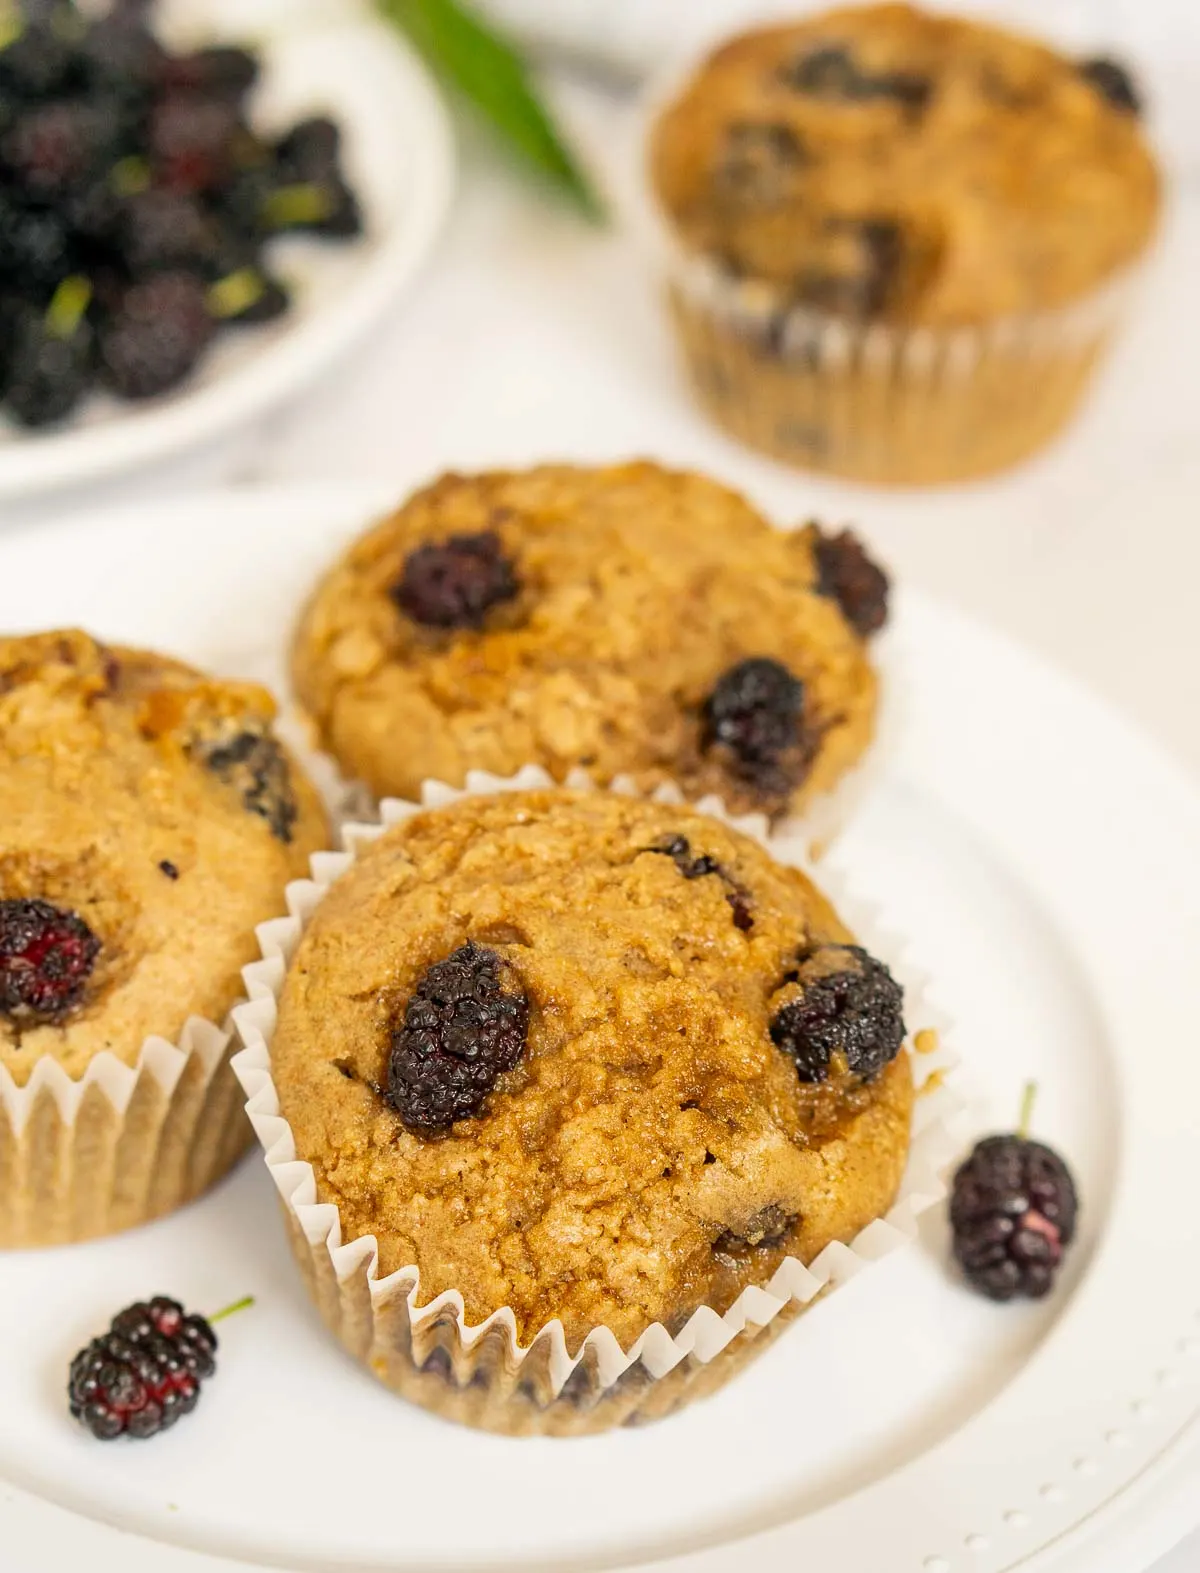 Plate with 3 mulberry muffins